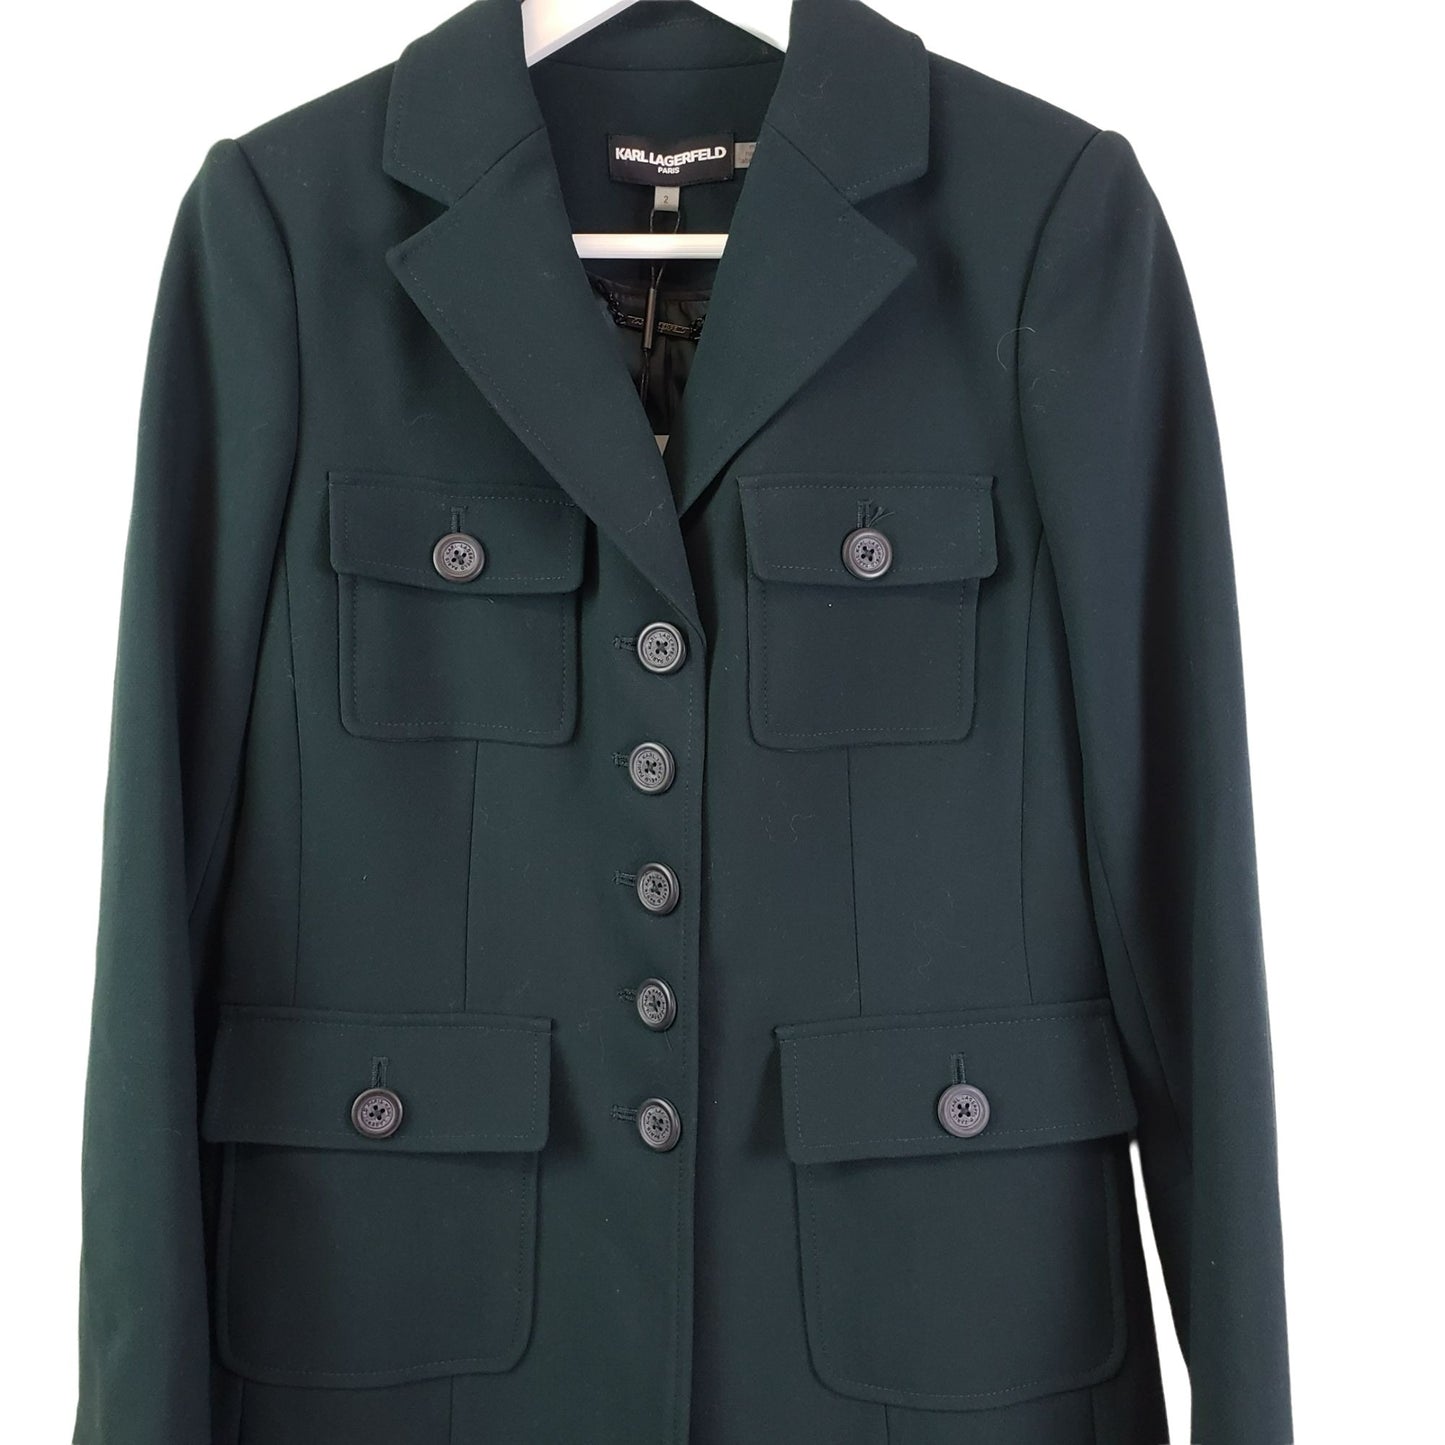 NWT Karl Lagerfeld Forest Green Jacket Size 2